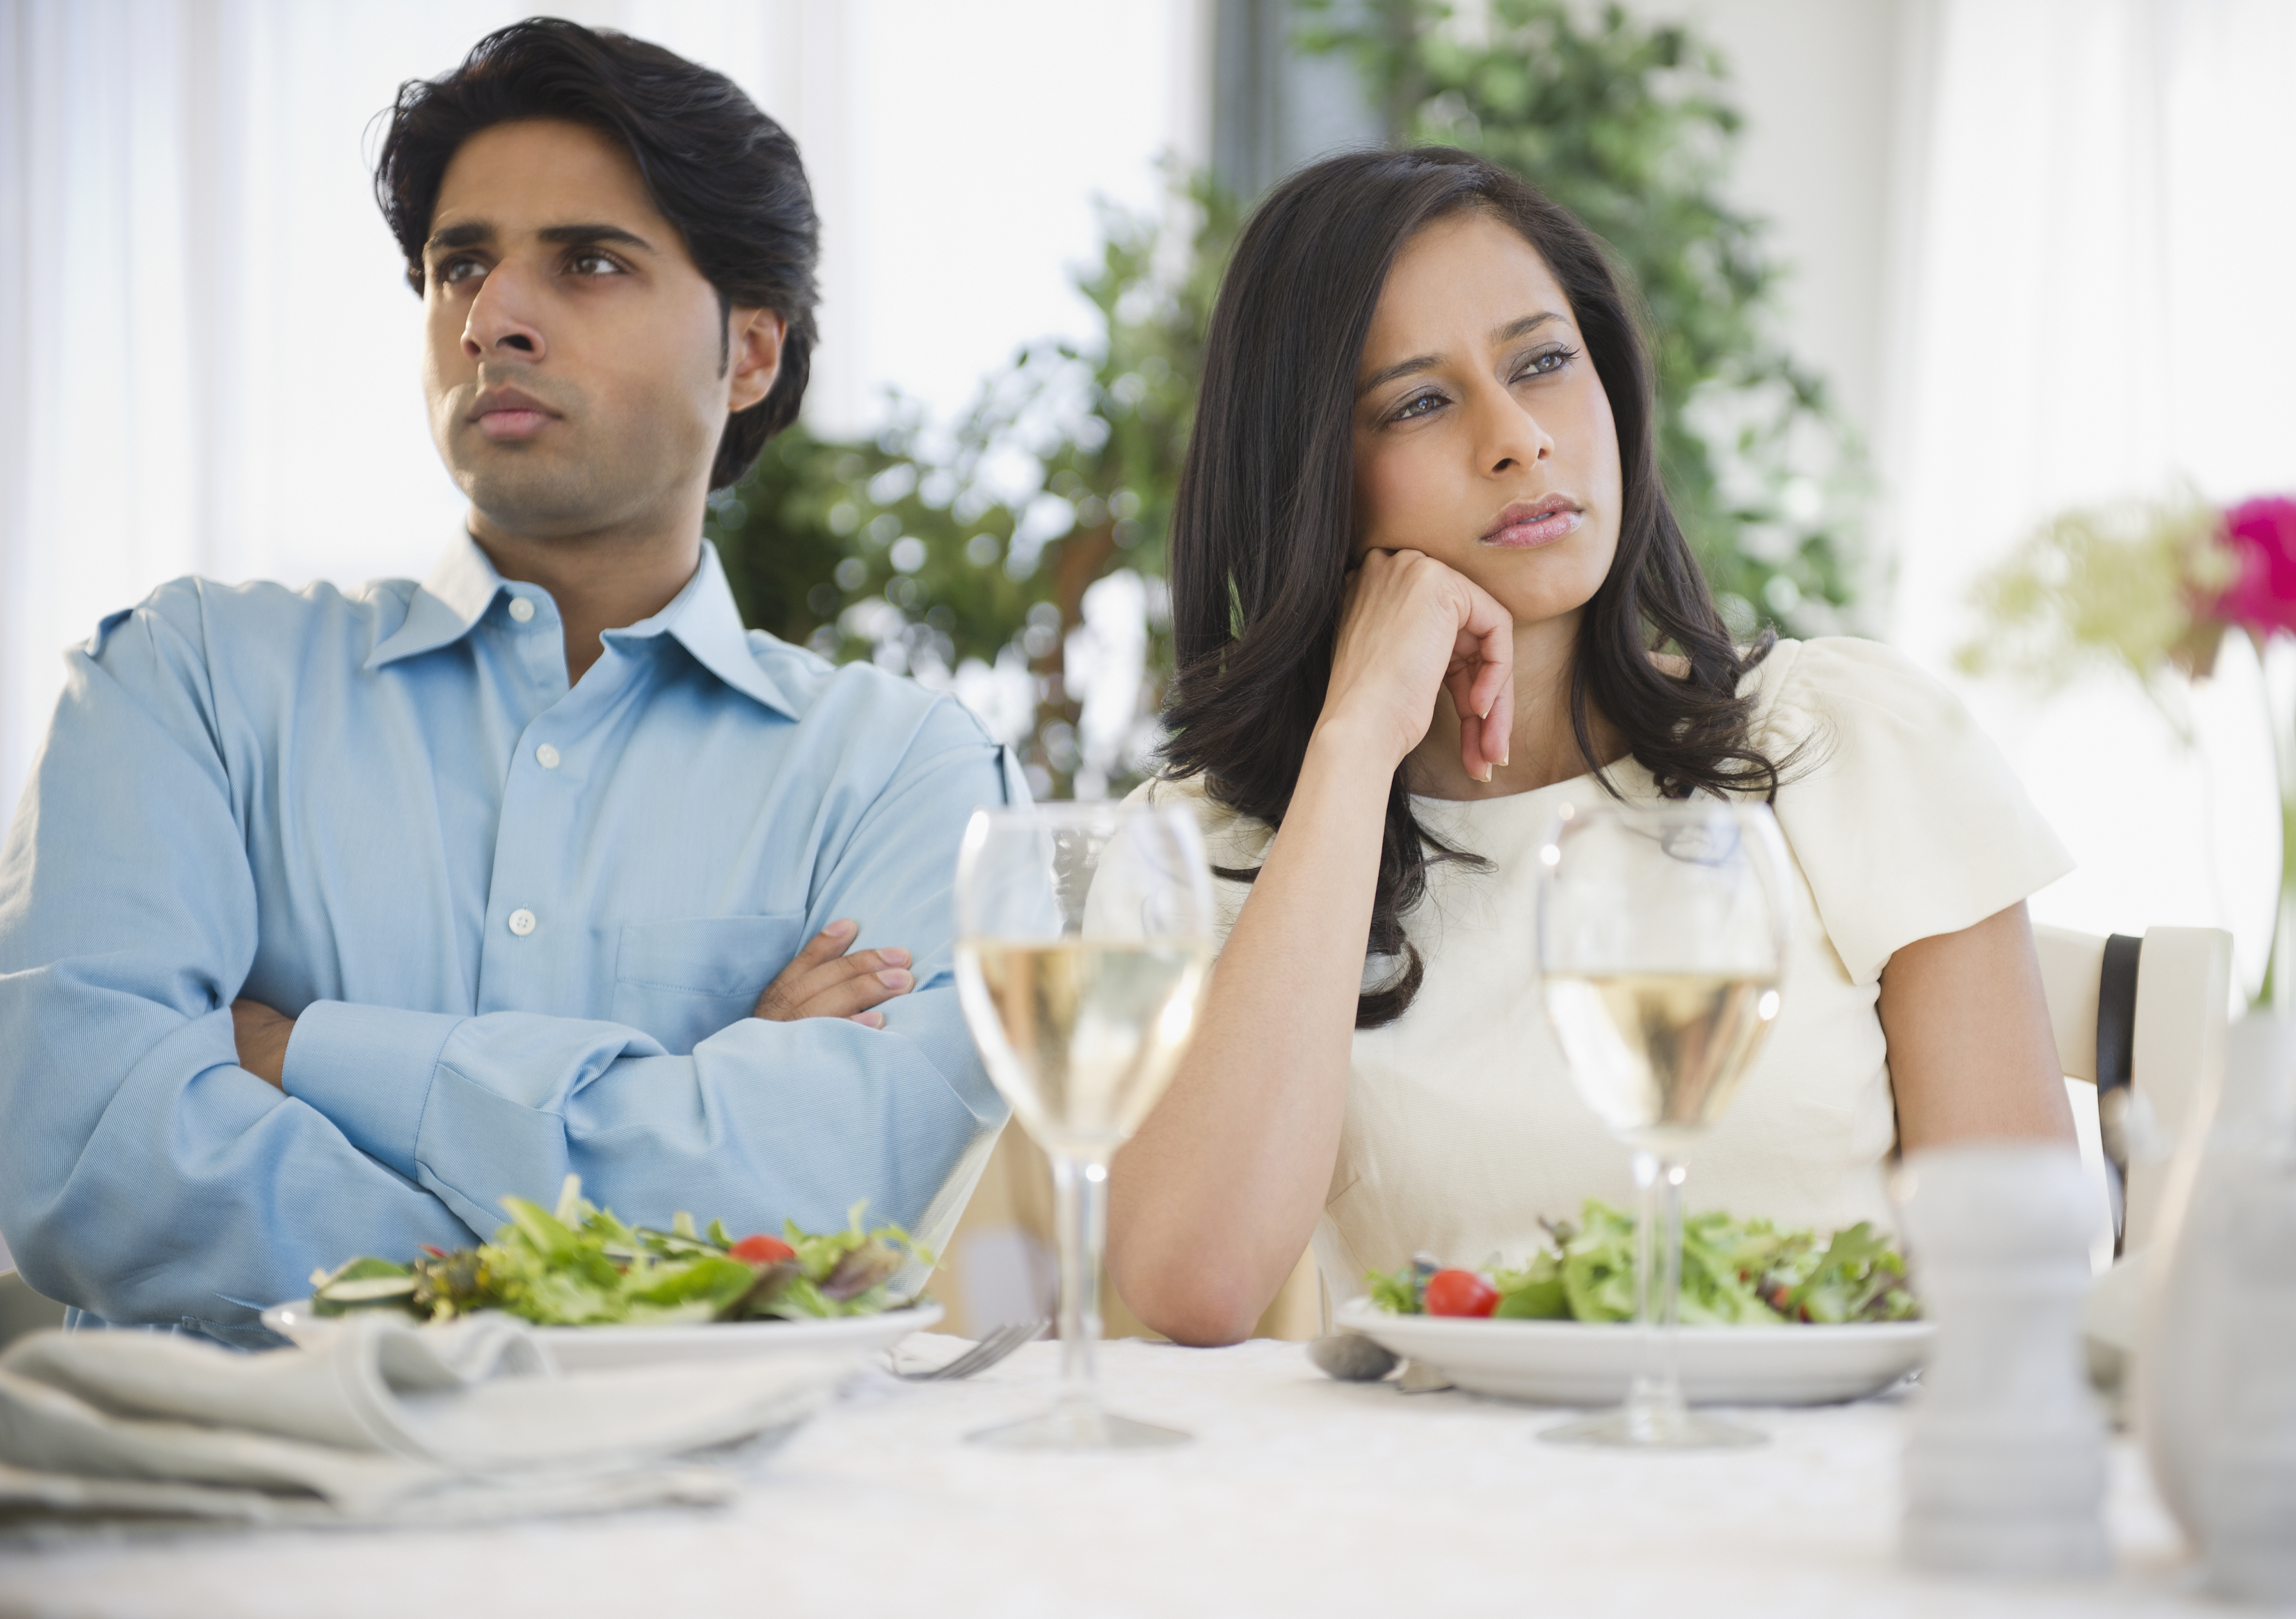 An angry couple at dinner | Source: Getty Images